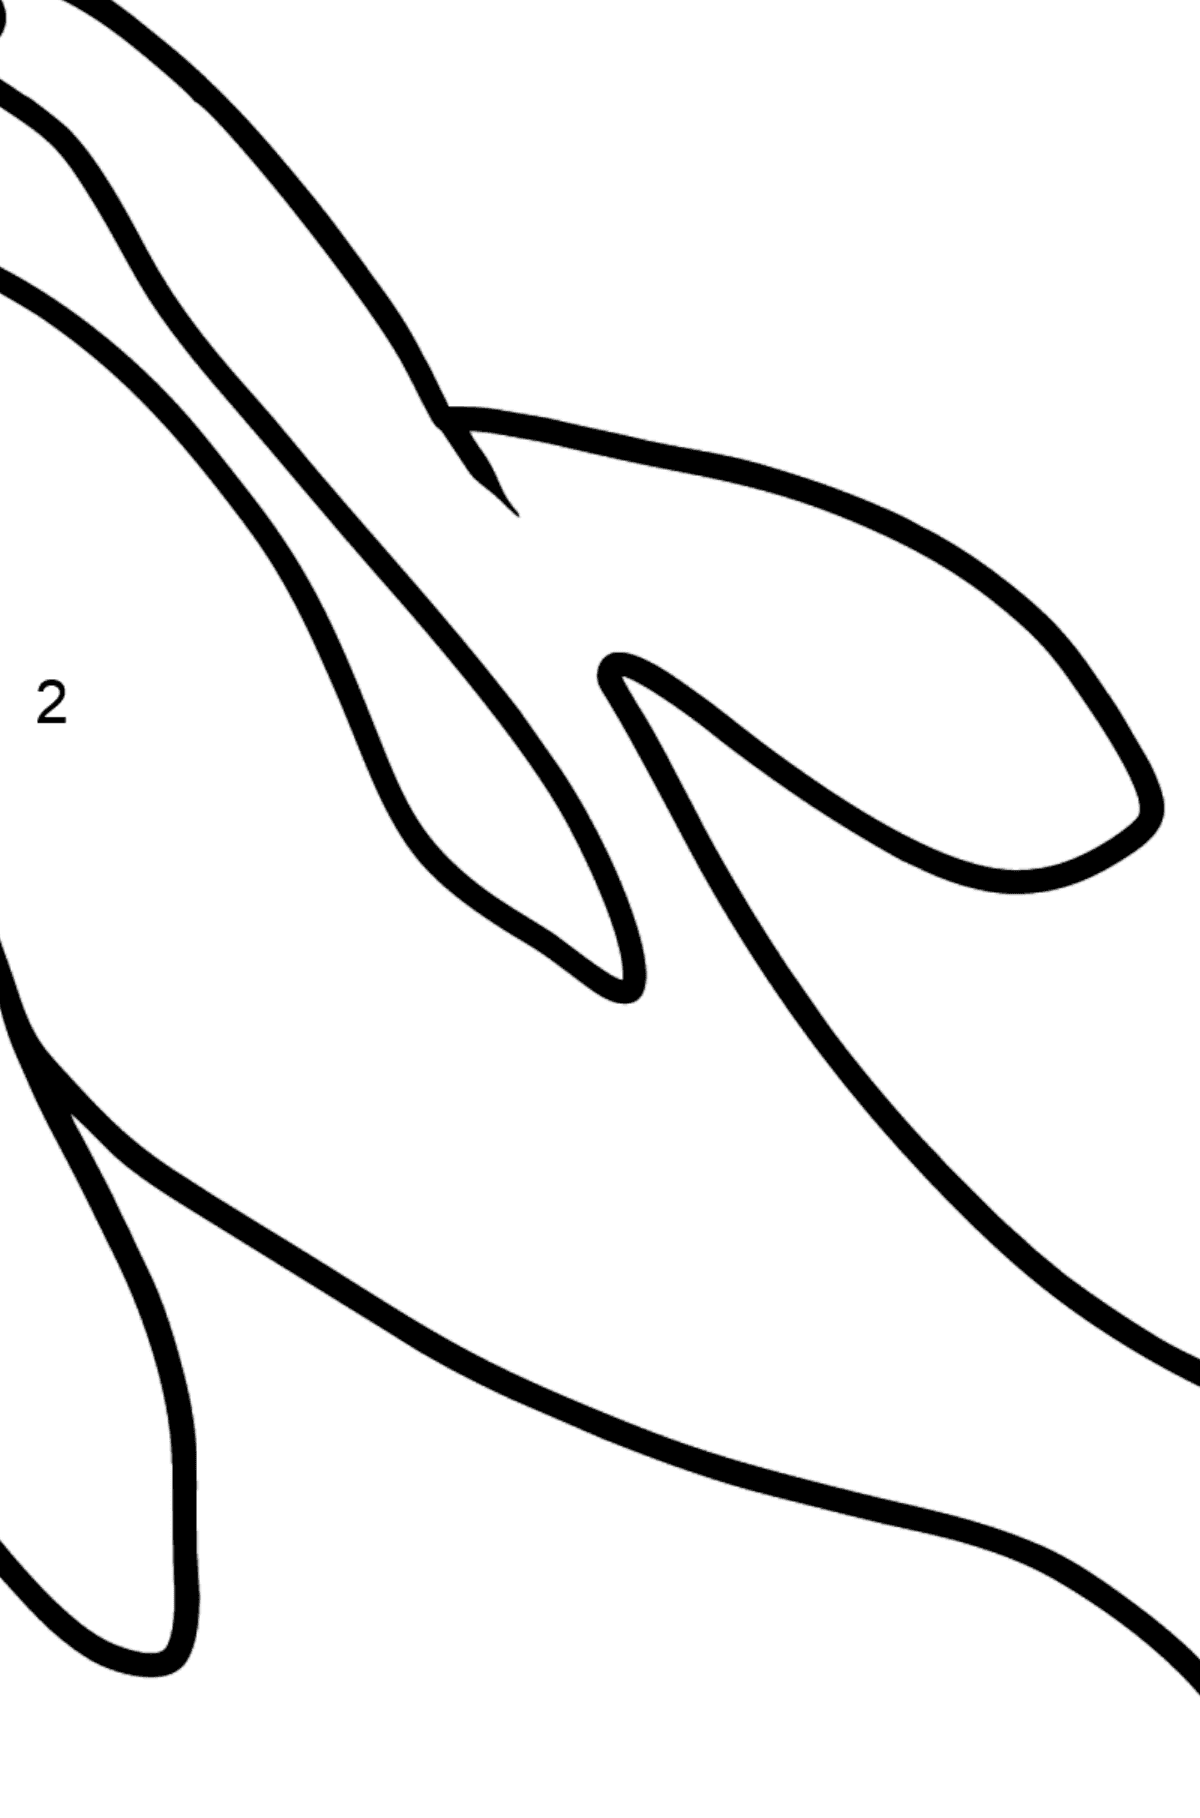 Dolphin coloring page - Coloring by Numbers for Kids